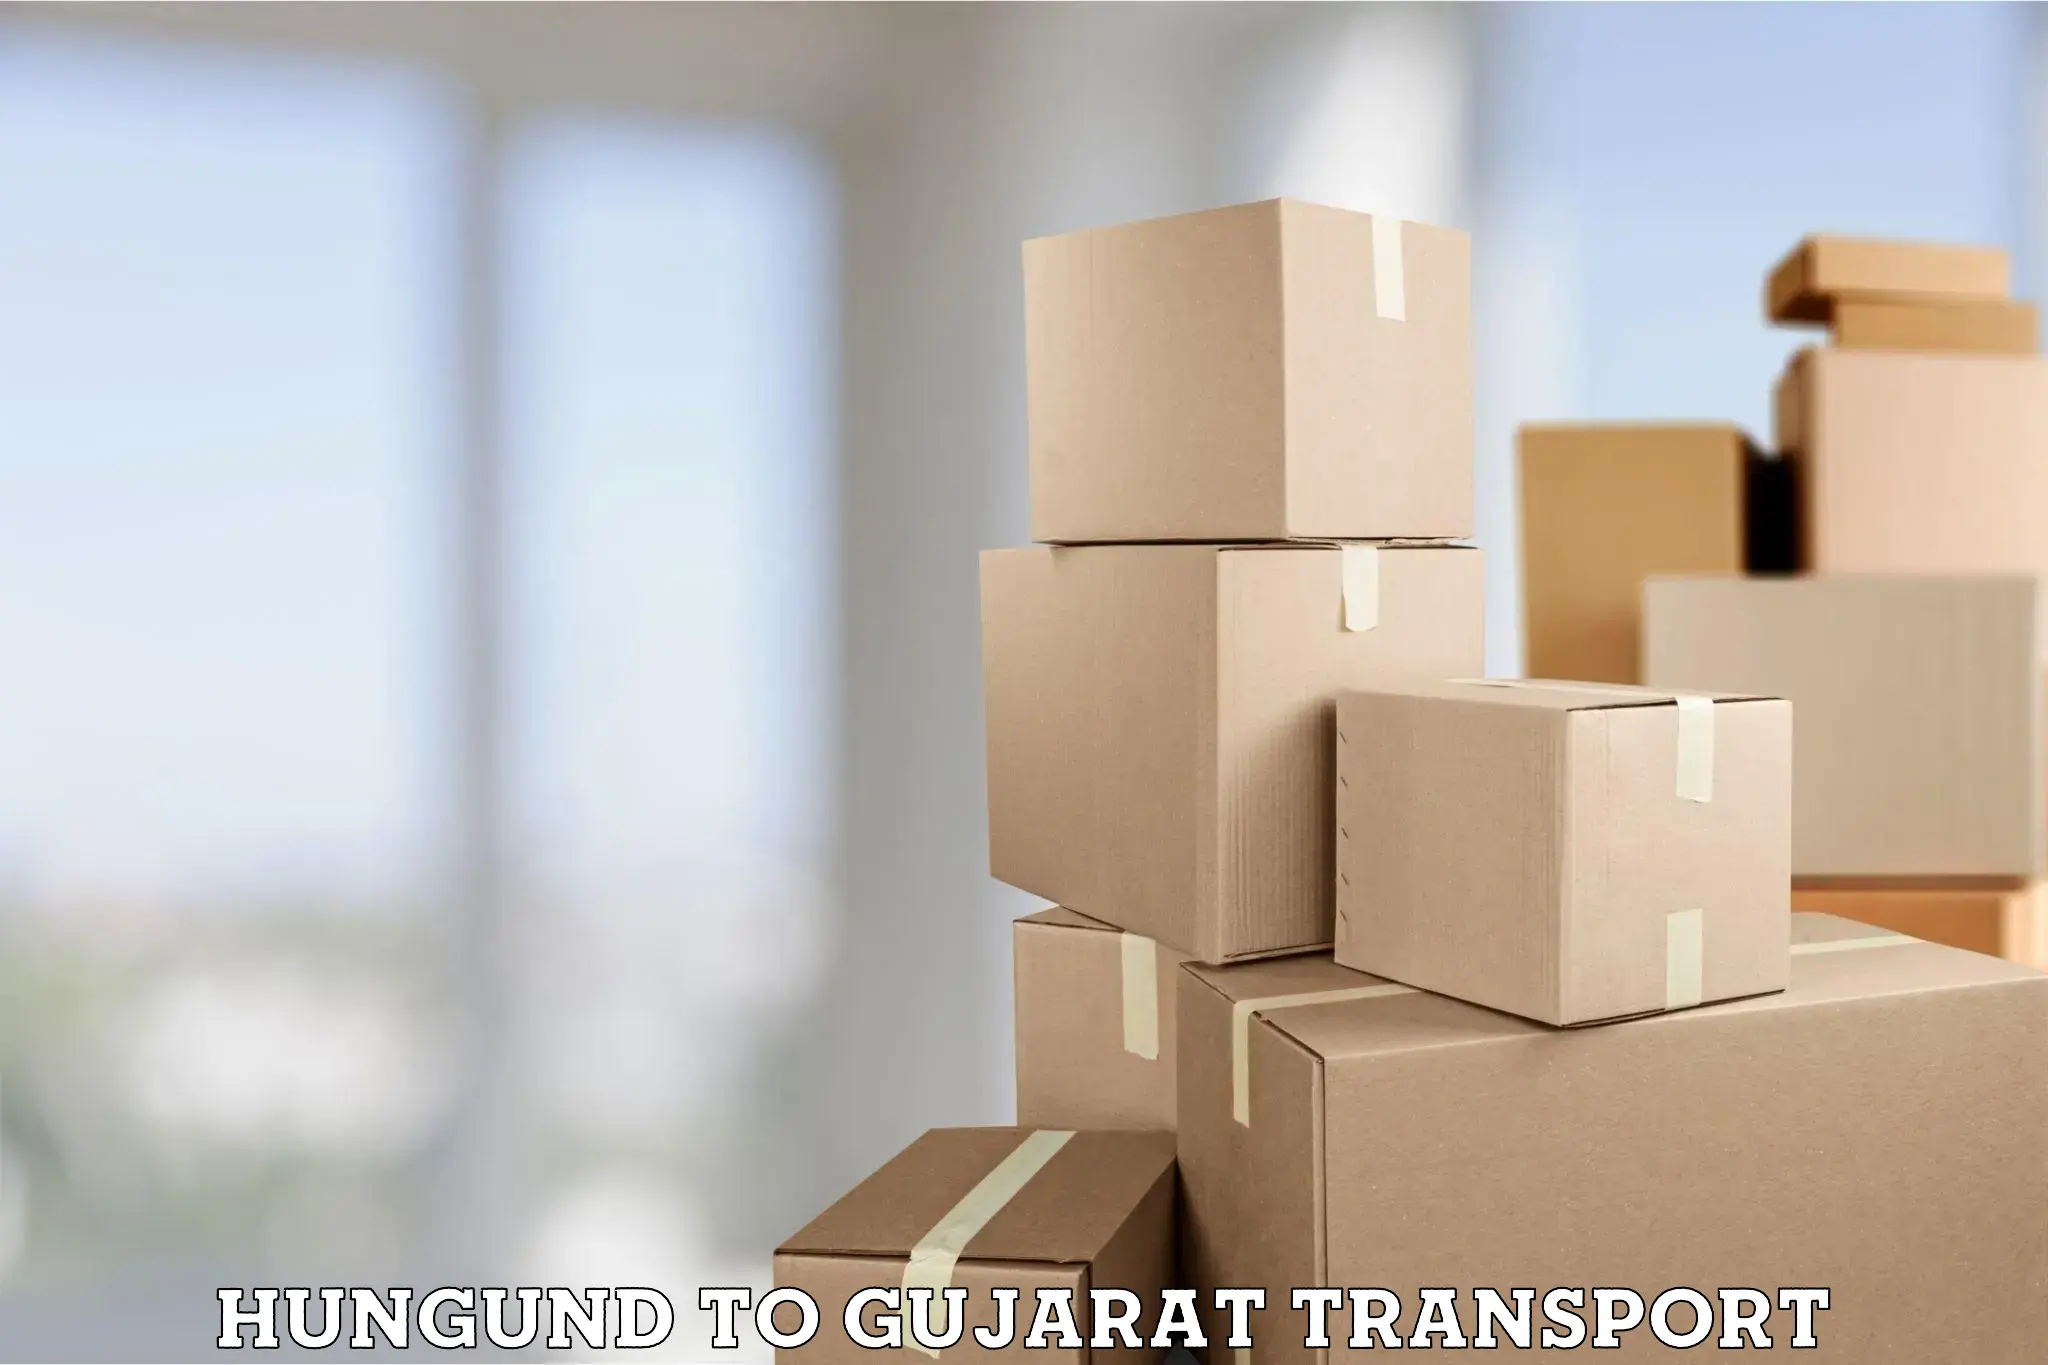 Container transport service Hungund to Patan Gujarat